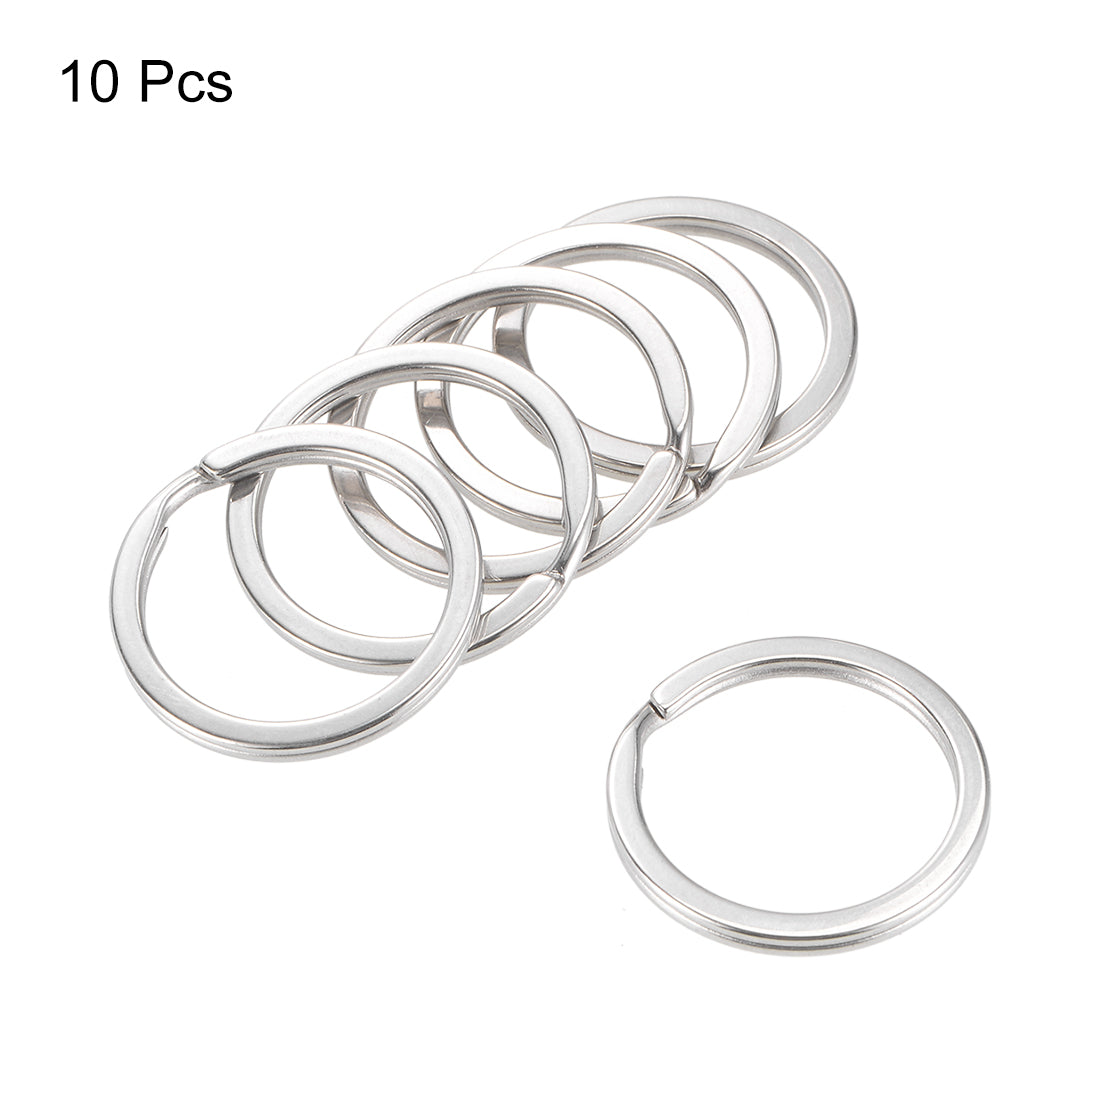 Uxcell Uxcell Split Key Ring 30mm Open Flat Jump Connector for Lanyard Zipper Handbag, Stainless Steel, Pack of 10